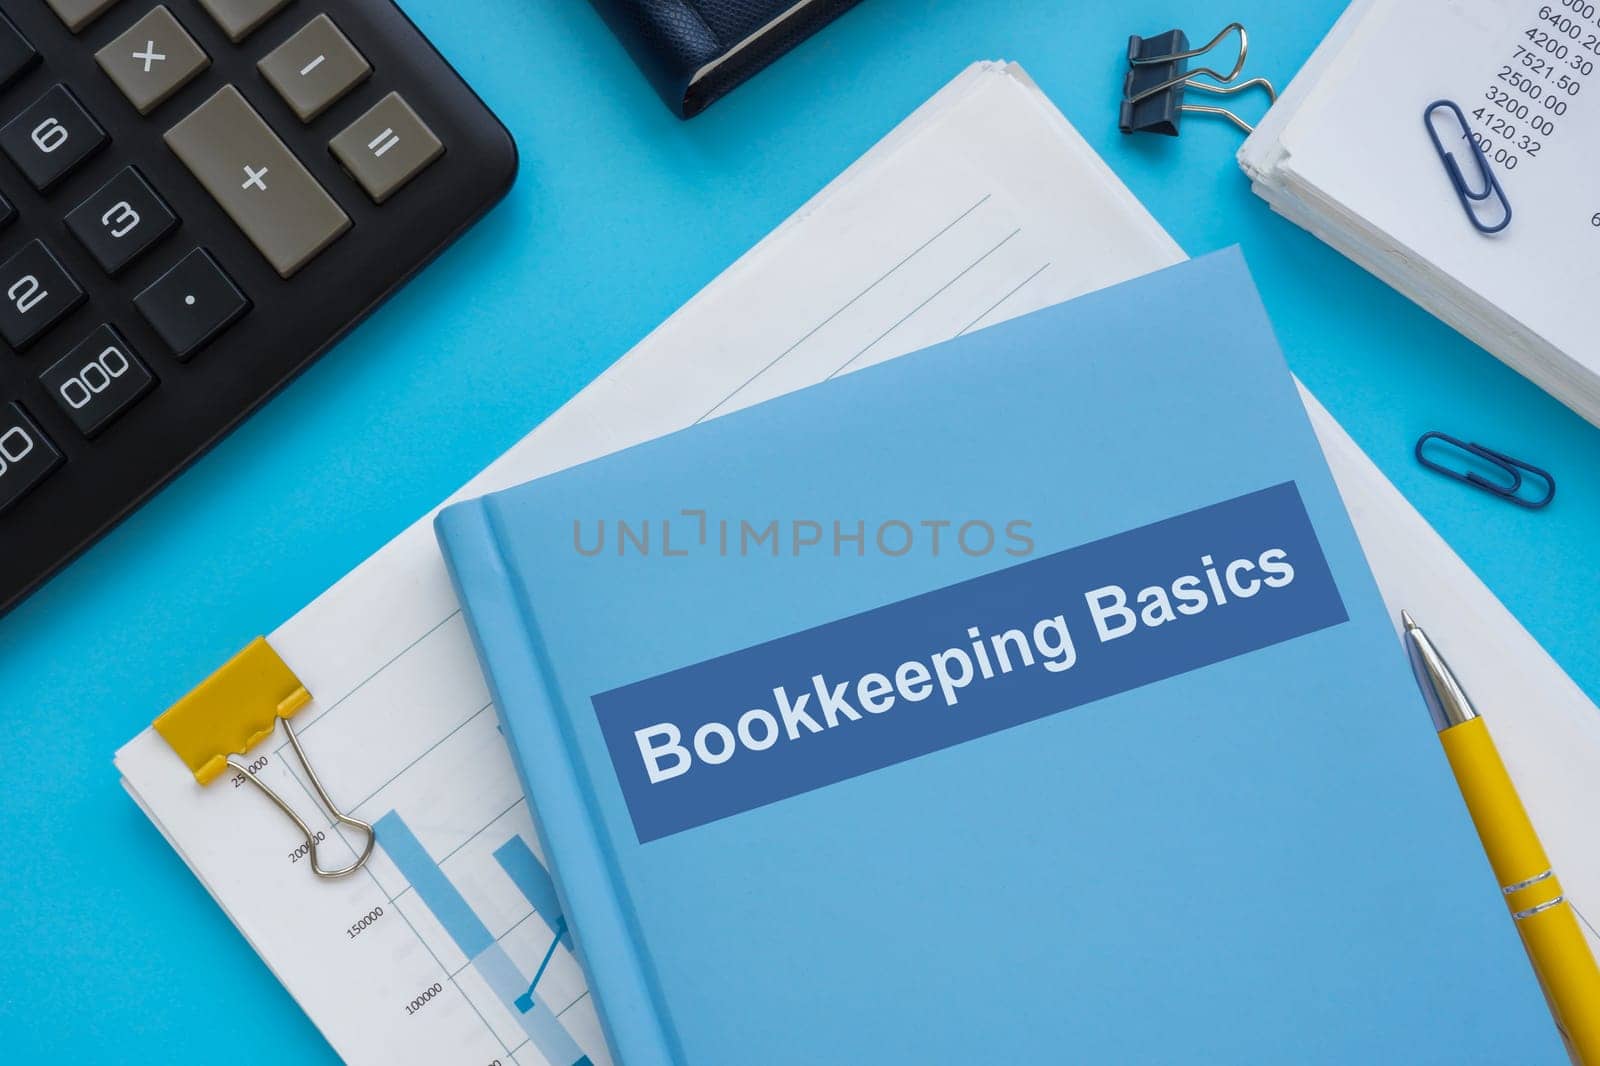 Bookkeeping basics books on the stack of papers.